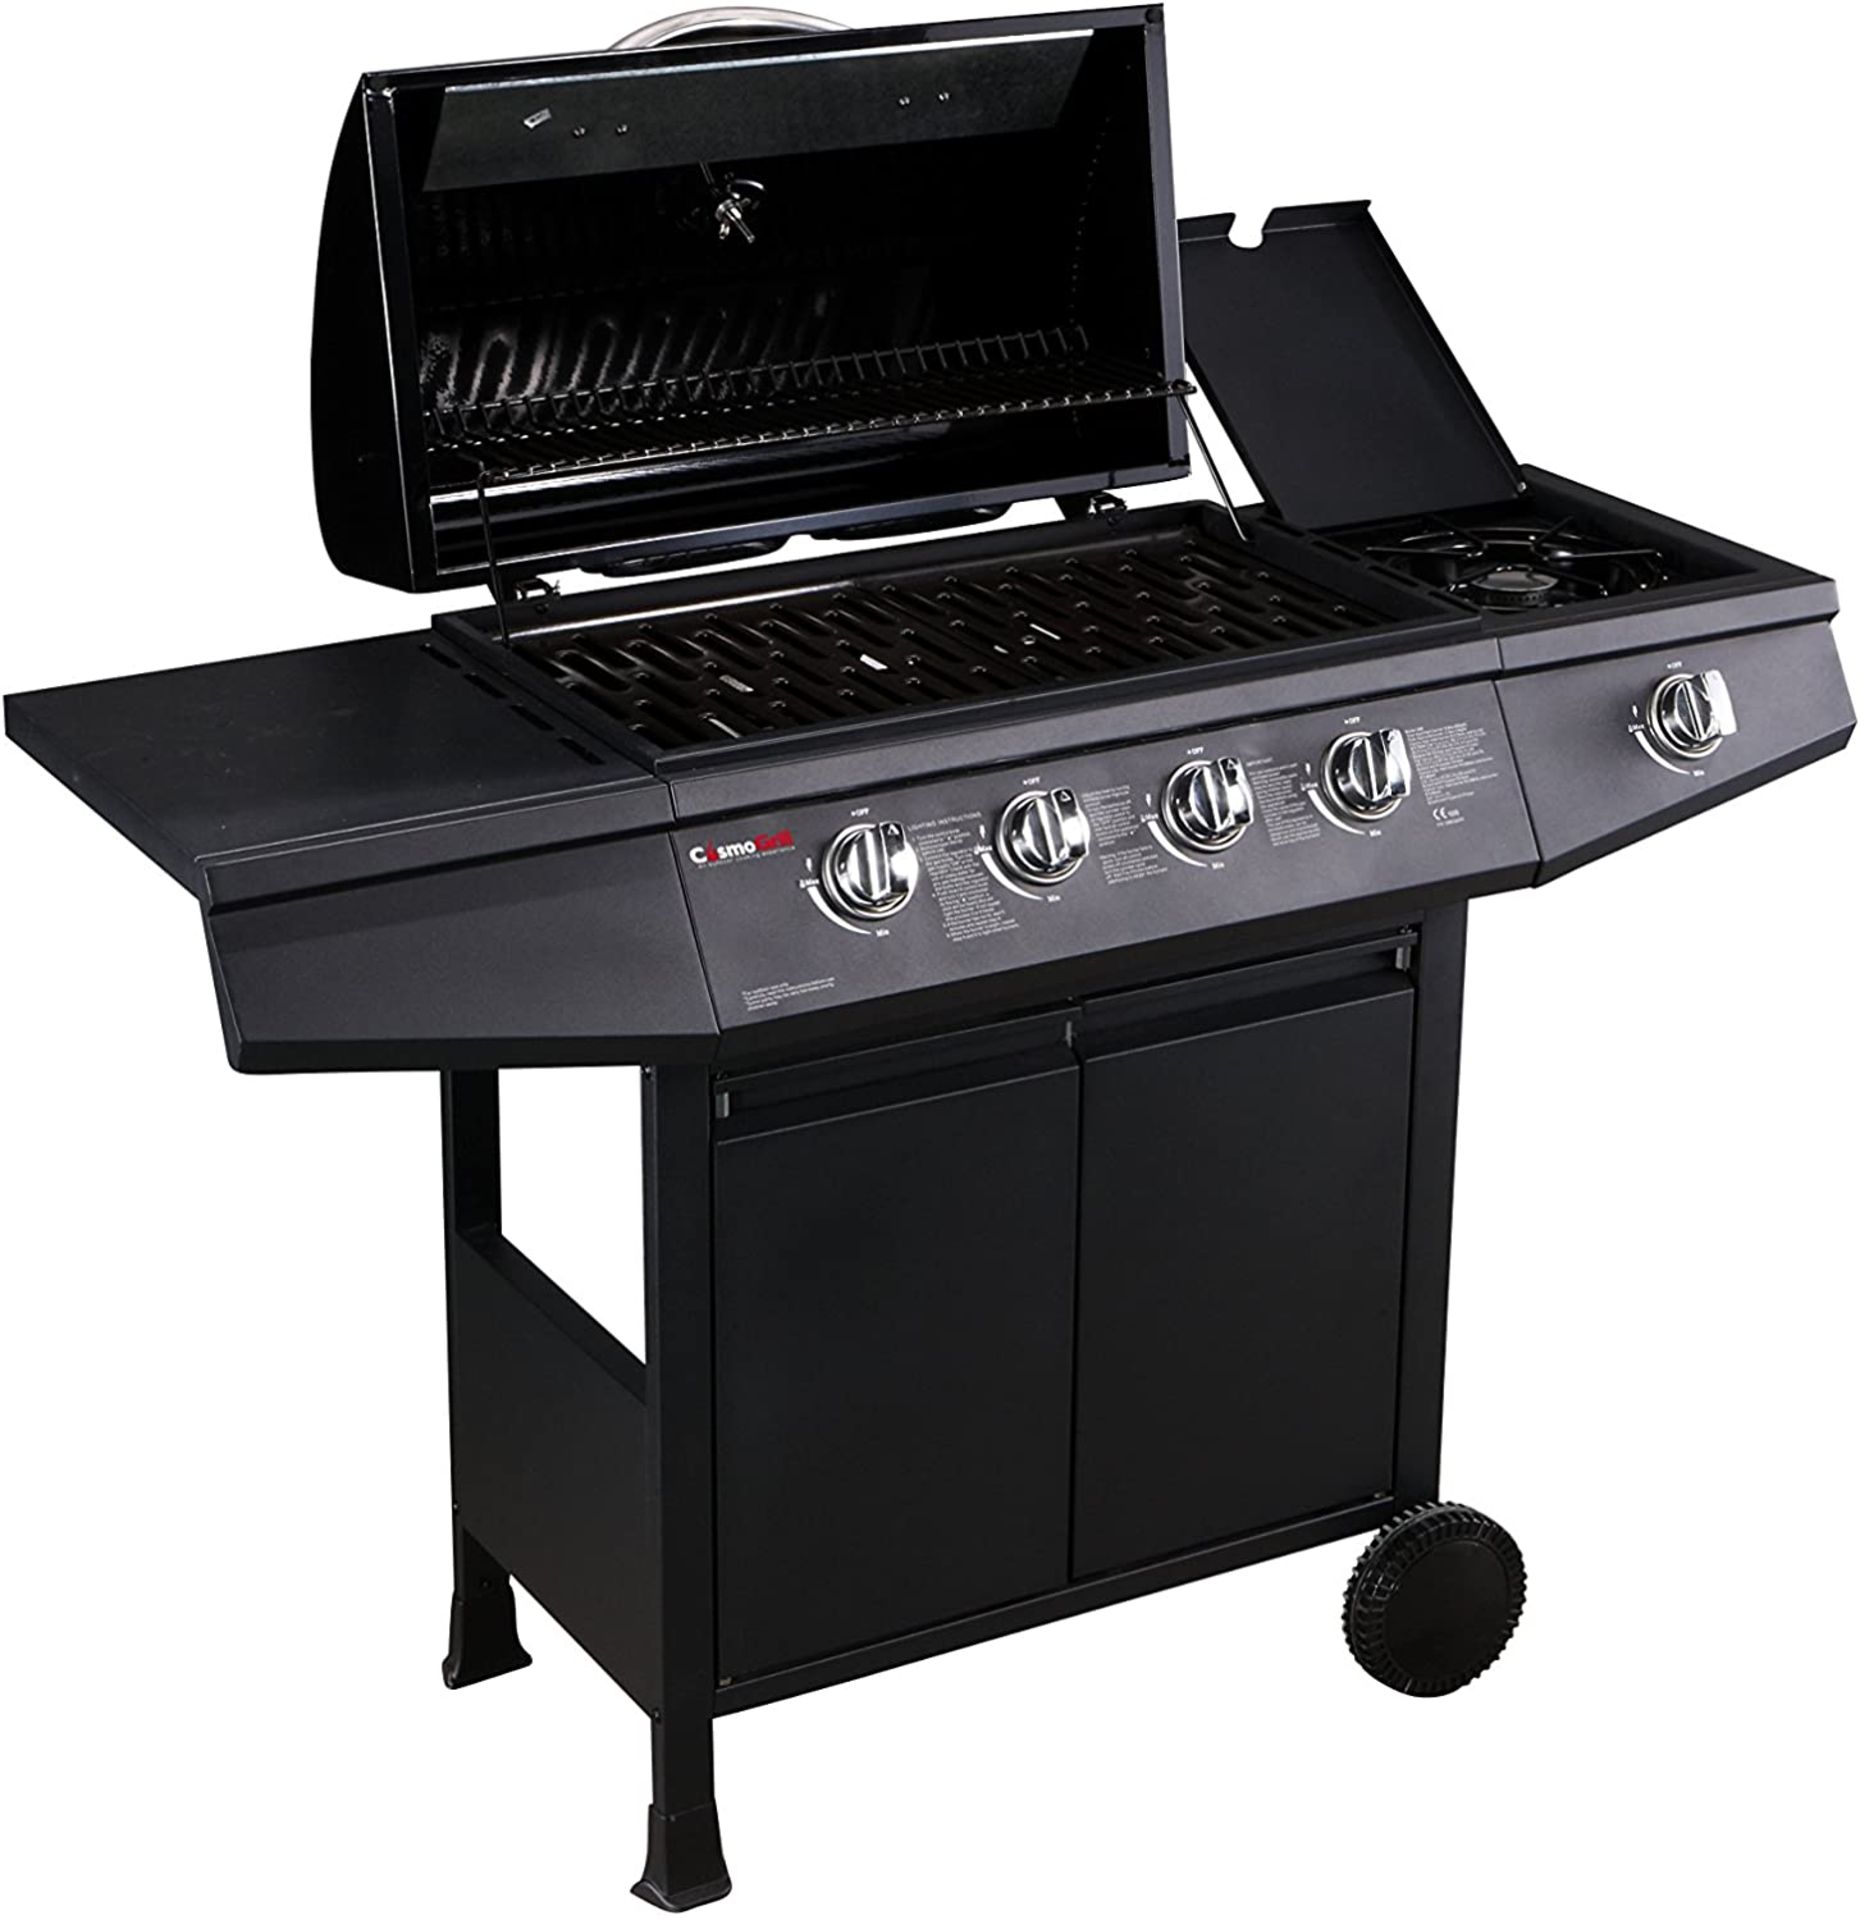 CosmoGrill 4+1 Gas Burner Garden Grill BBQ Barbecue w/Side Burner & Storage - RRP £939.99. - Image 2 of 6